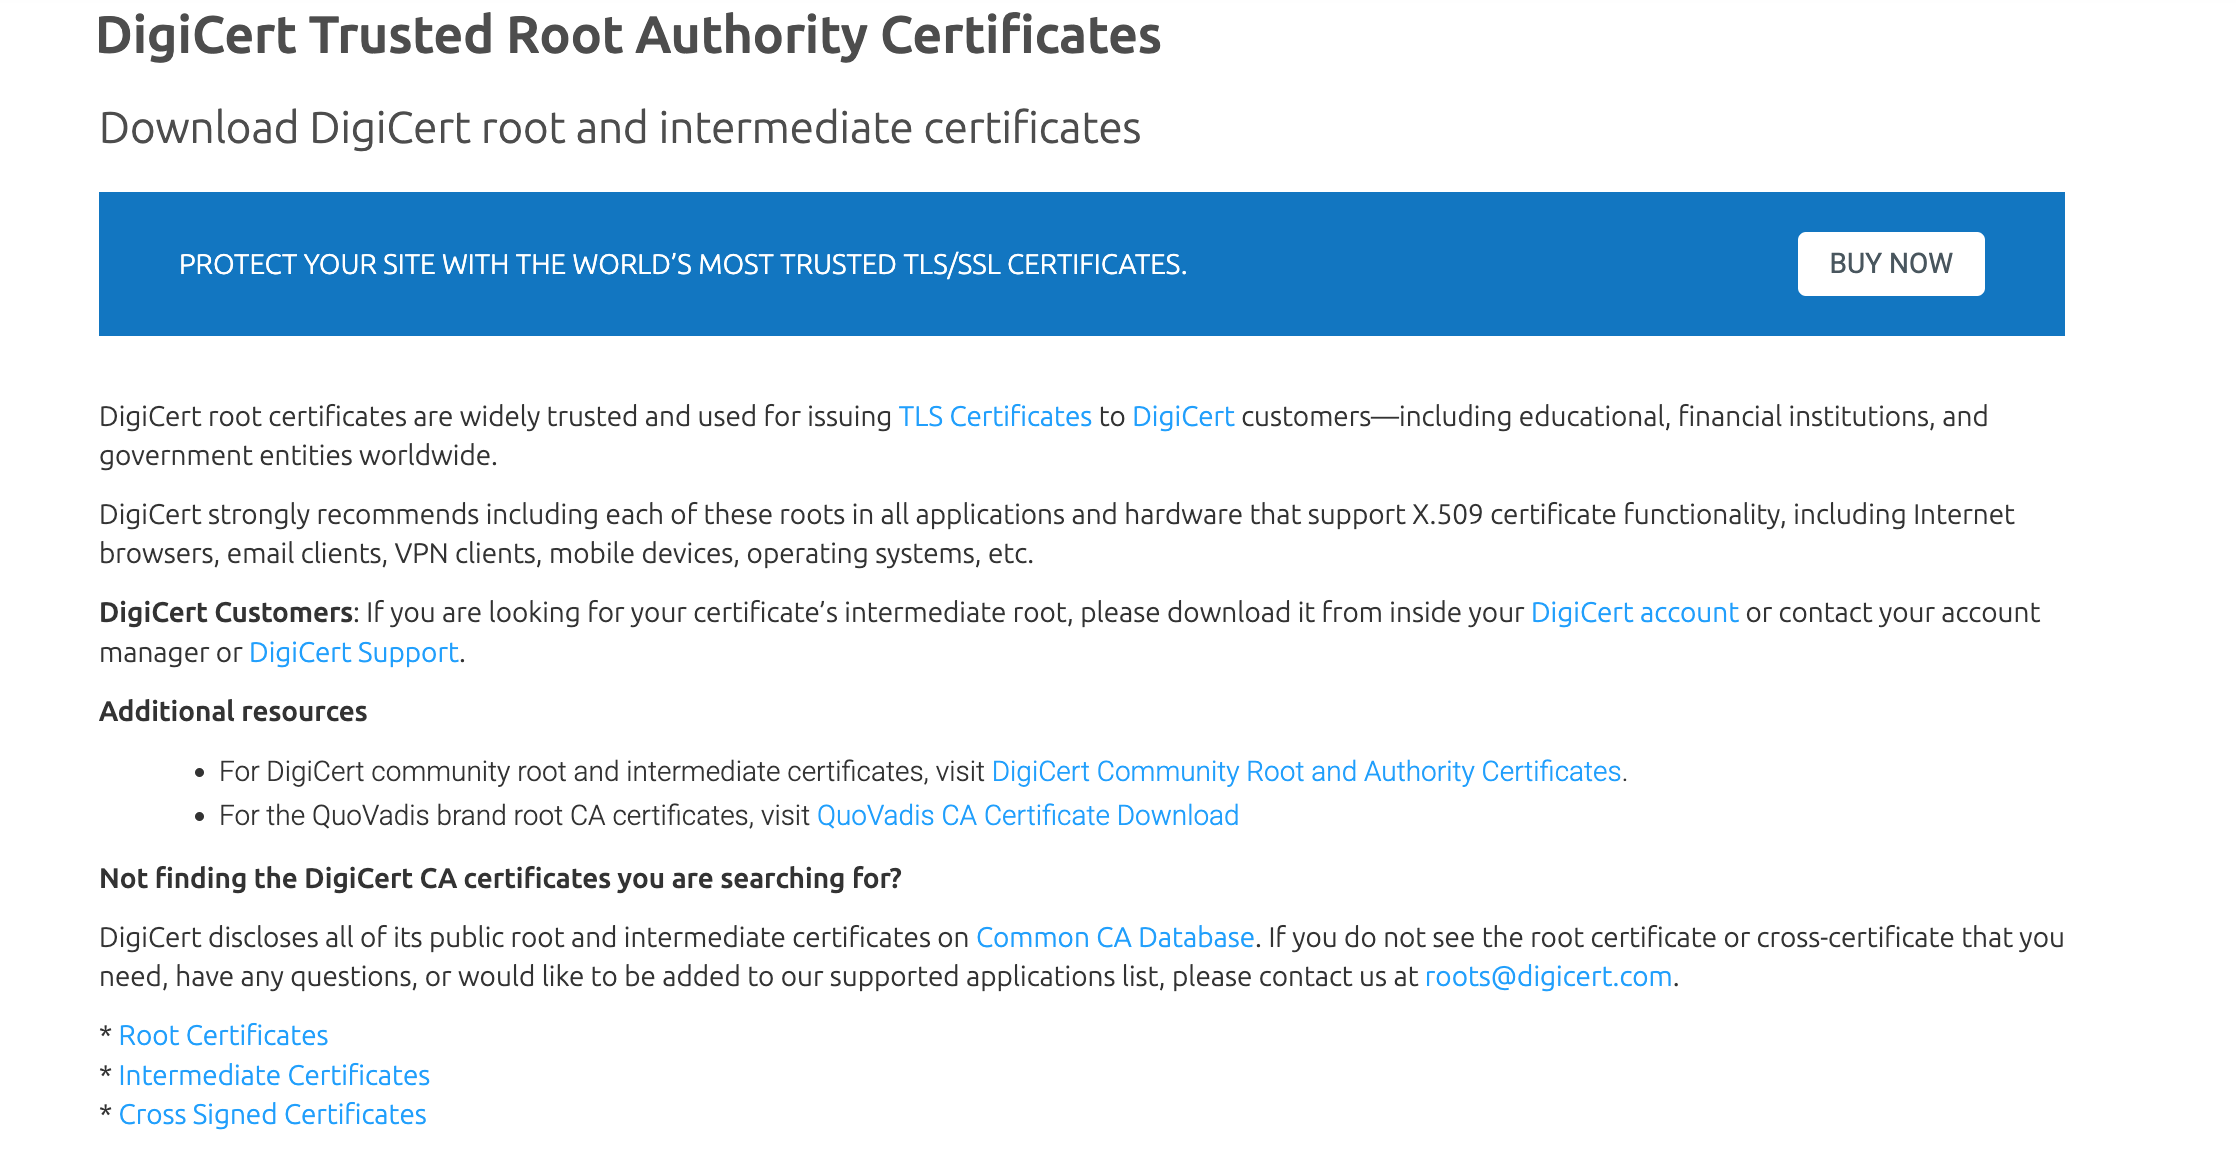 DigiCert Trusted Root Authority Certificates